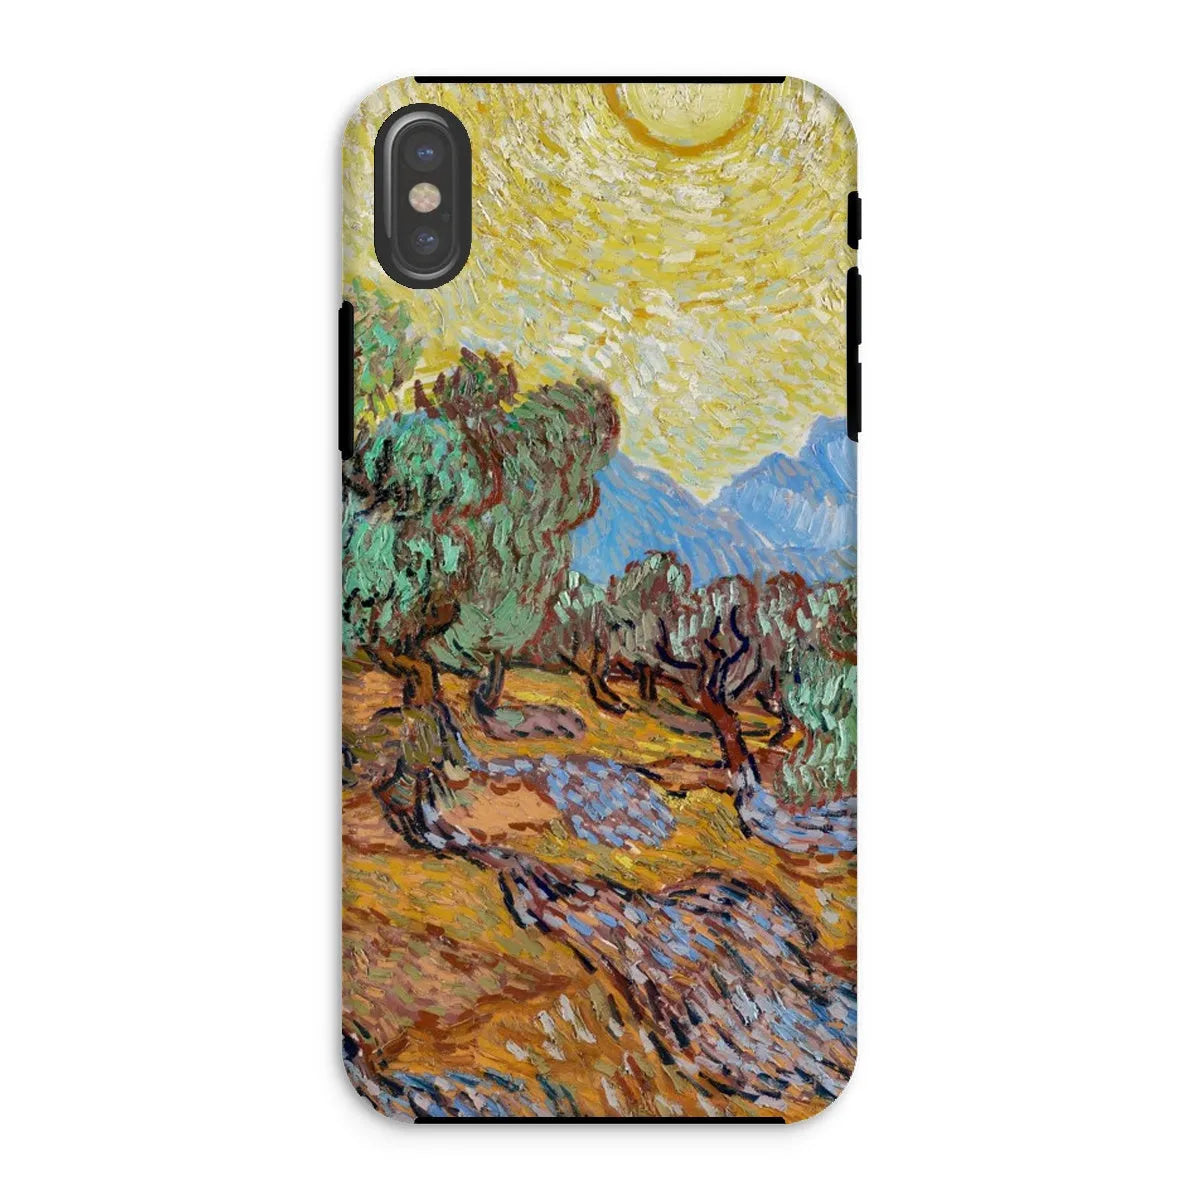 Olive Trees Too - Impressionist Phone Case - Vincent Van Gogh - Iphone Xs / Matte - Mobile Phone Cases - Aesthetic Art